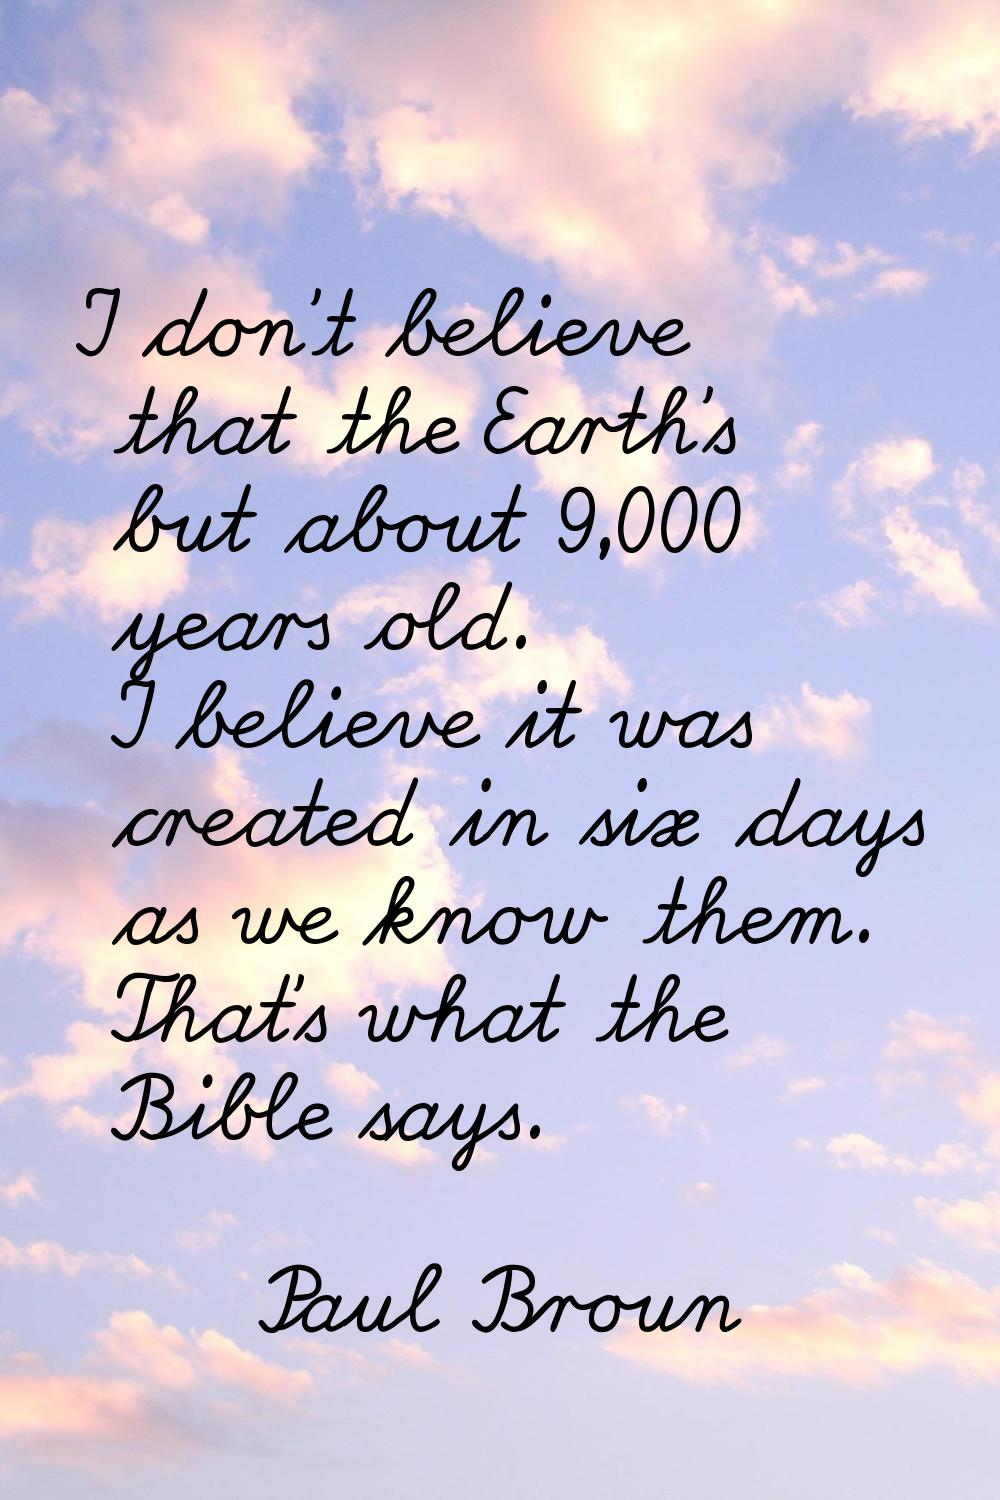 I don't believe that the Earth's but about 9,000 years old. I believe it was created in six days as